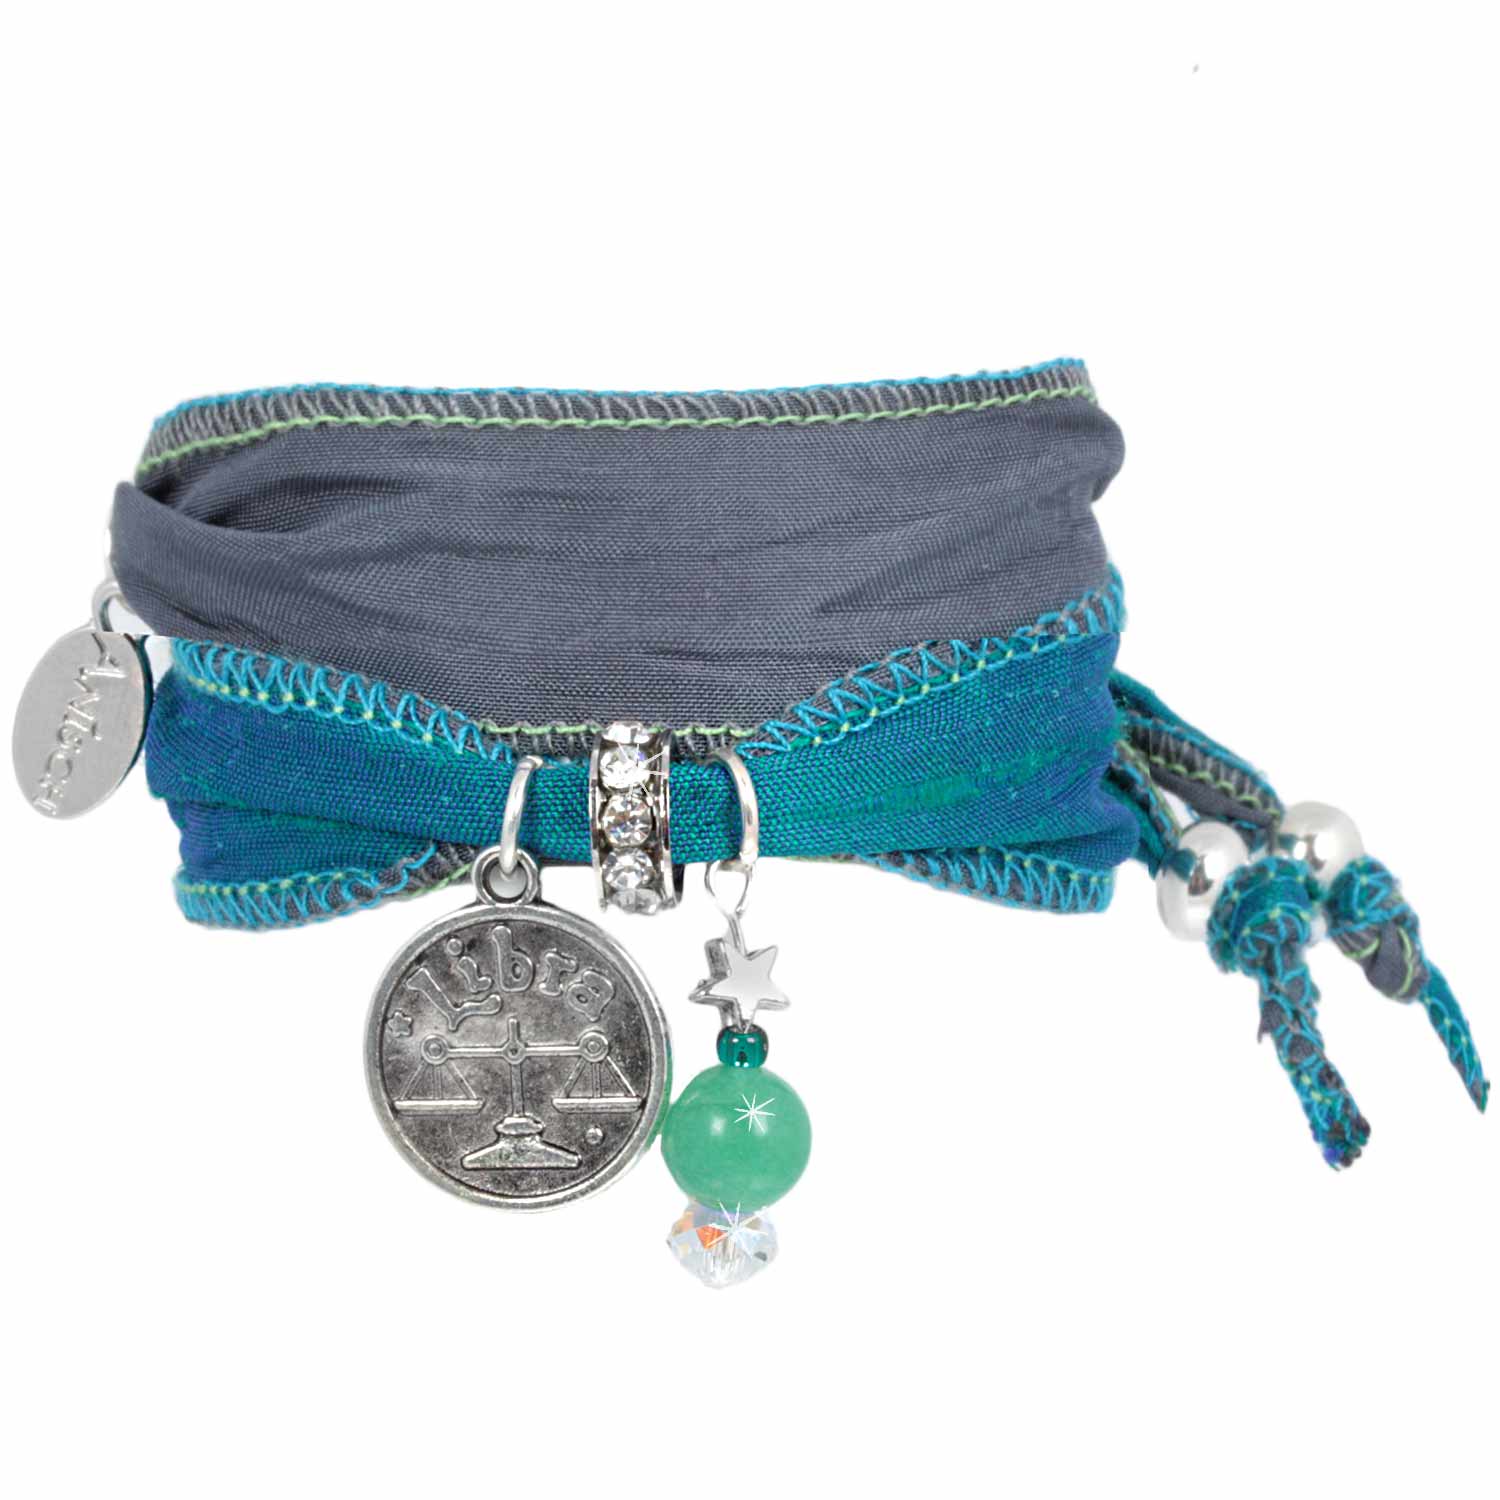 Libra - Signs of Zodiac Bracelet from Indian saris